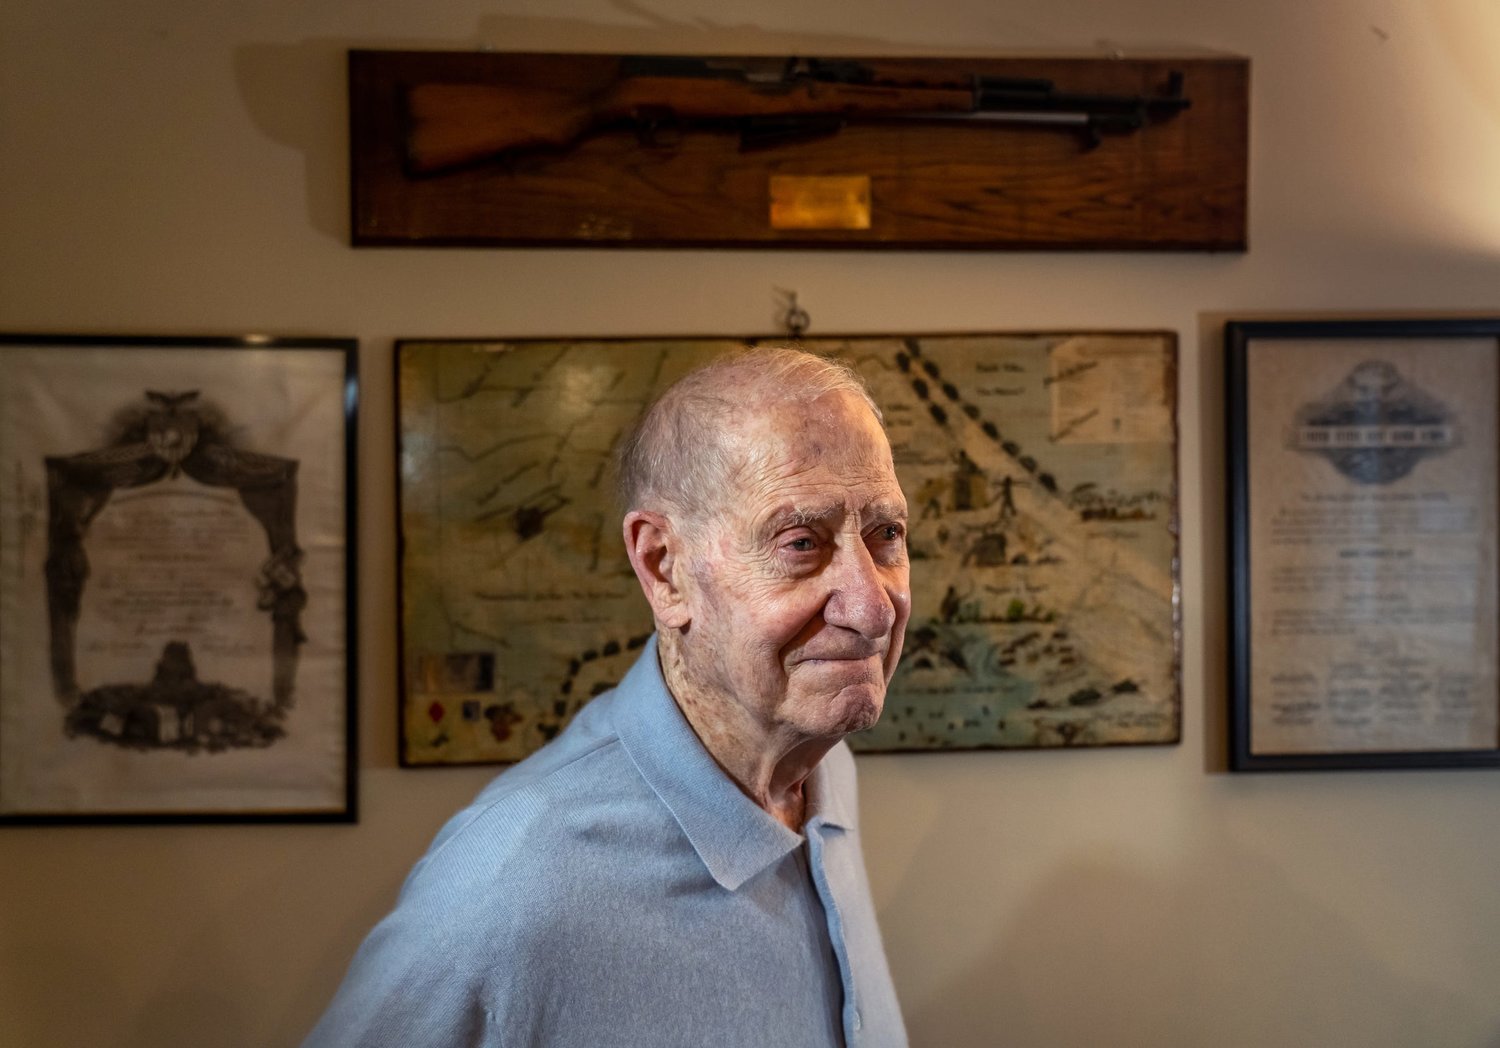 Carmelo Milia, 93, of Troy retired as a colonel after a career in the U.S. Army, following graduation from West Point Academy. But when news broke of the Pearl Harbor attack, Milia had no notion of serving in the military. "Our whole life rotated around that war and it was a given that that when you turned to be 17 years-old that you were going into the military some way or another. I just accepted that and when I turned 17 I went into the military," said Milia, who would go on to be an Lieutenant Tank Platoon leader in the Korean War from 1950-1952 and a Tank Battalion Commander in Vietnam from 1968-1969.